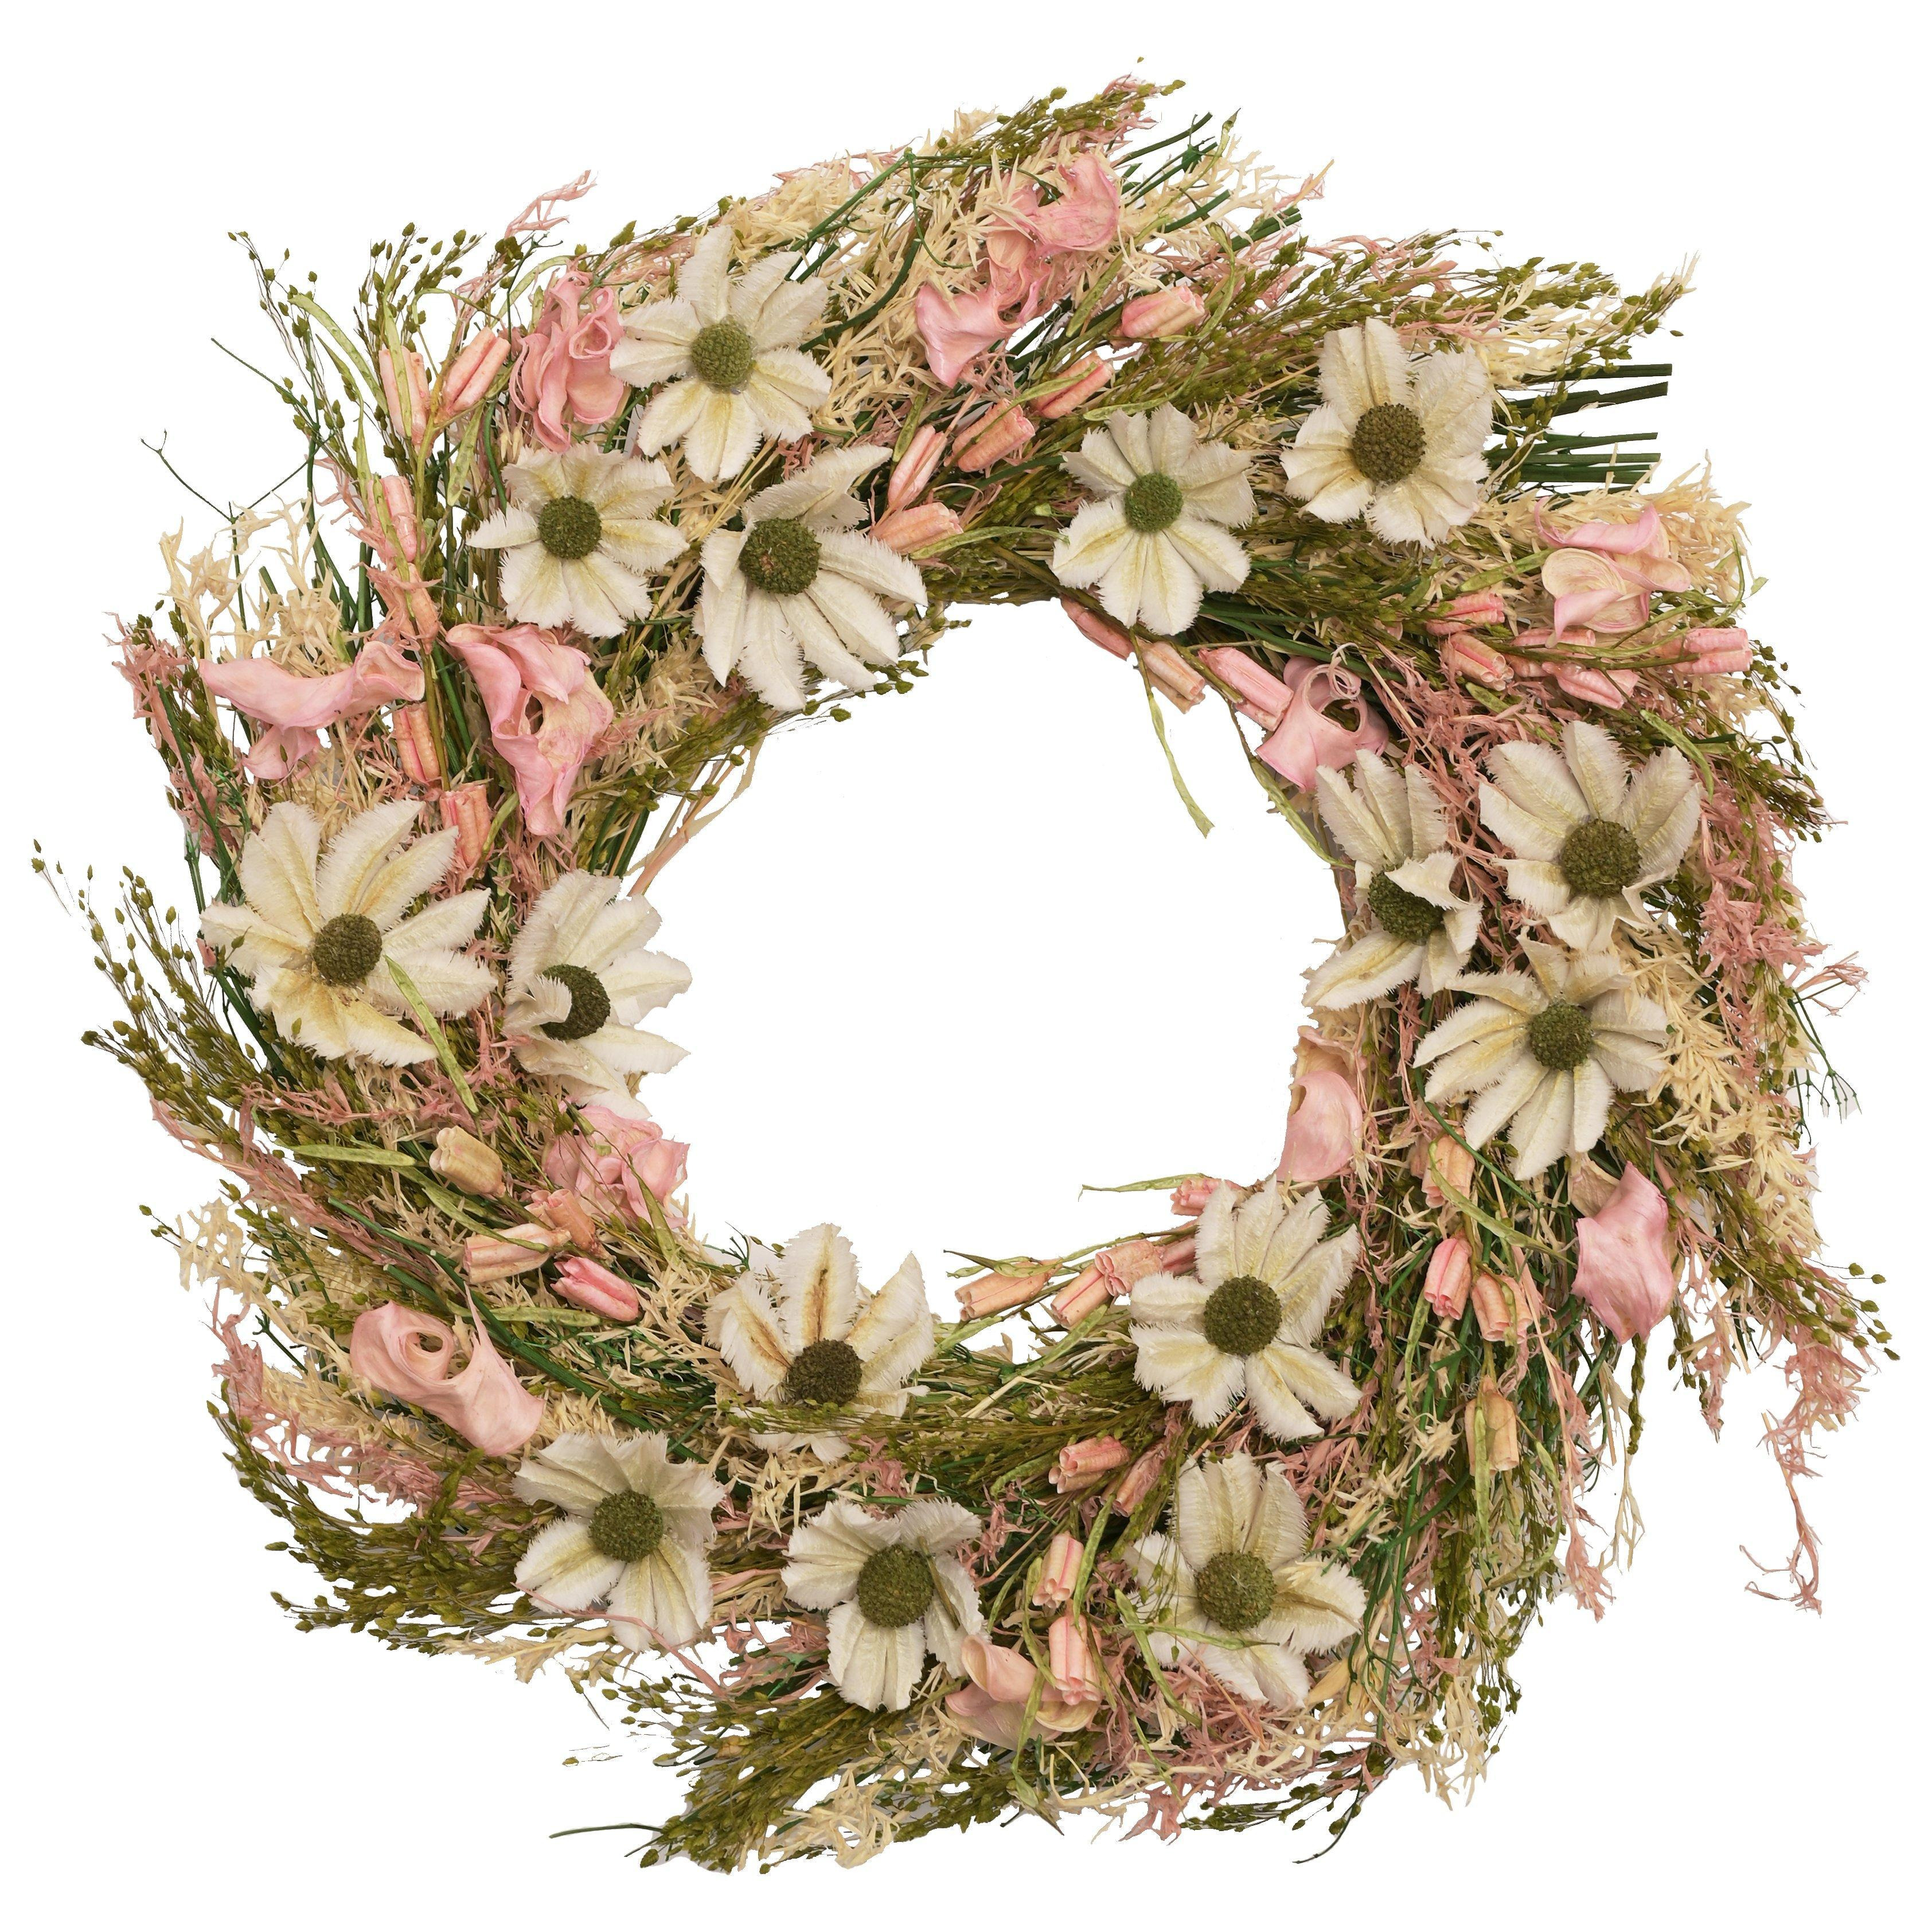 Dried Floral Wreath - Pink & White - image 1